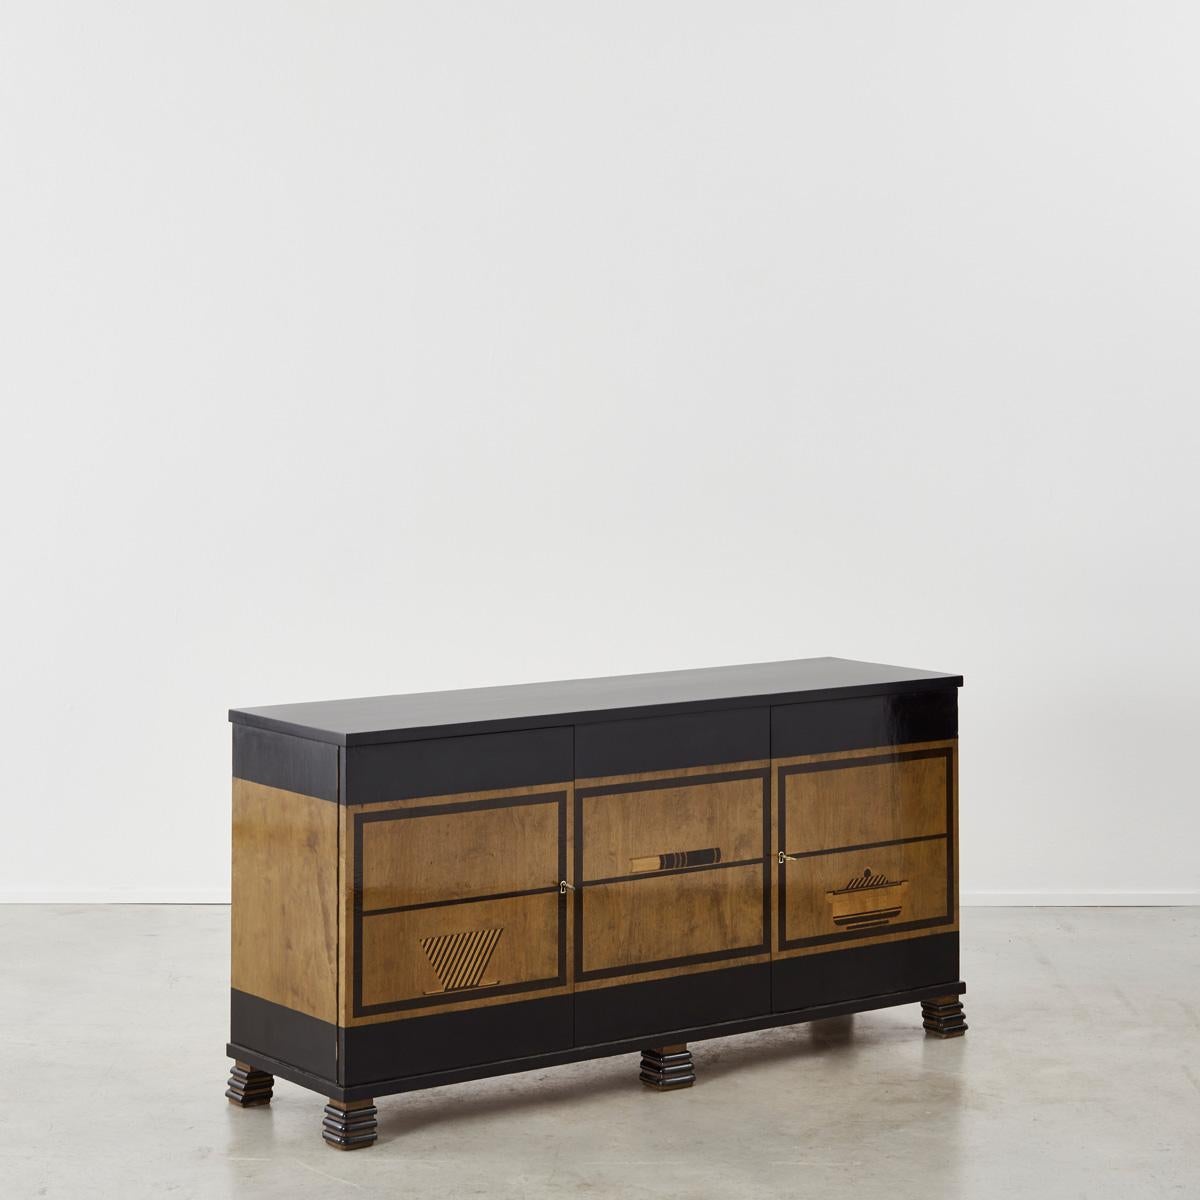 An extremely rare Boet sideboard featuring a trompe l’oeil decoration, blackened wood structure and walnut veneer. With cheeky, stacked feet and playful inlays that bring to mind an early take on pop art, this piece doesn’t take itself too